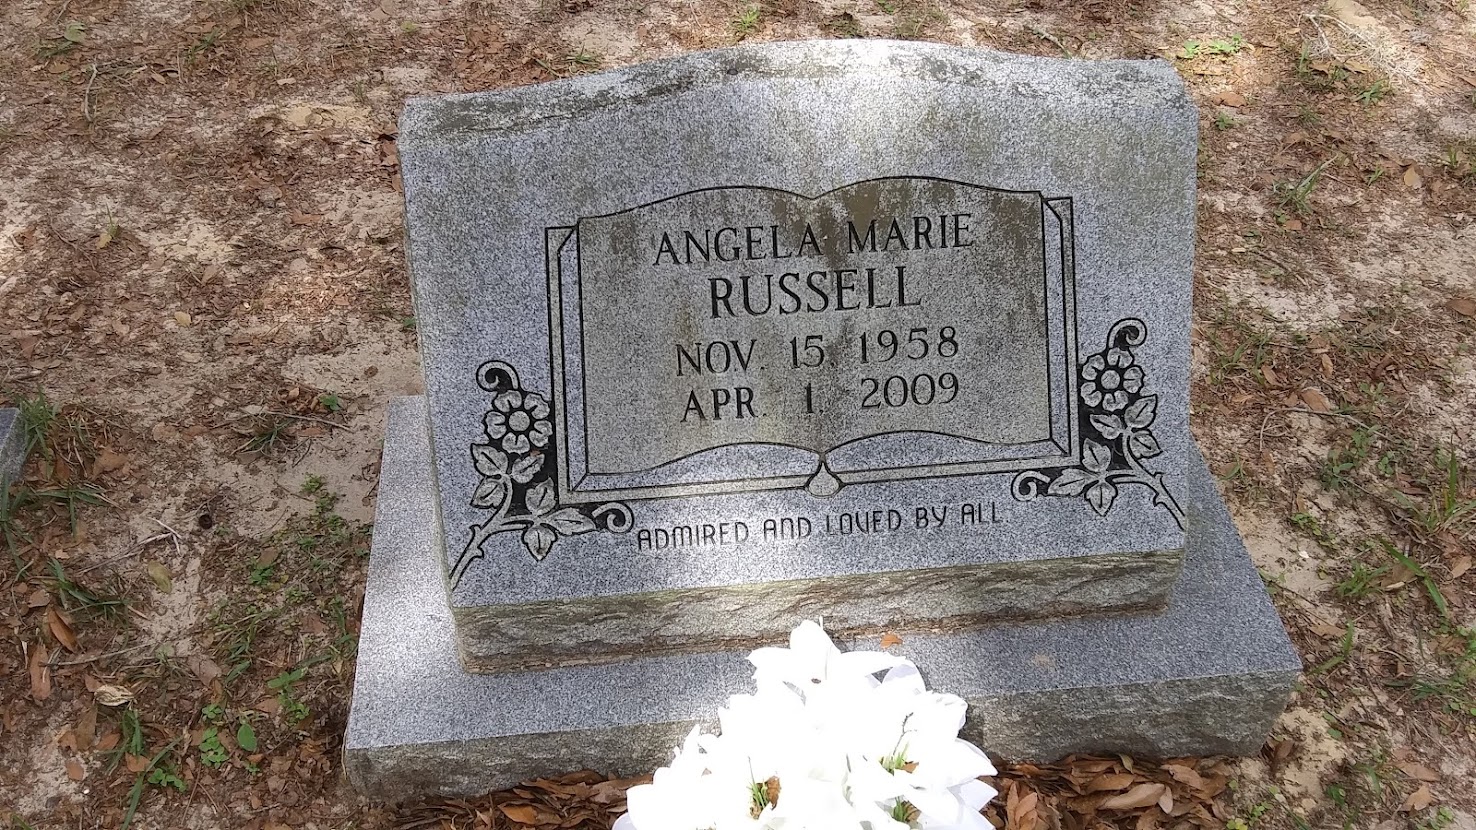 Headstone for Russell, Angela